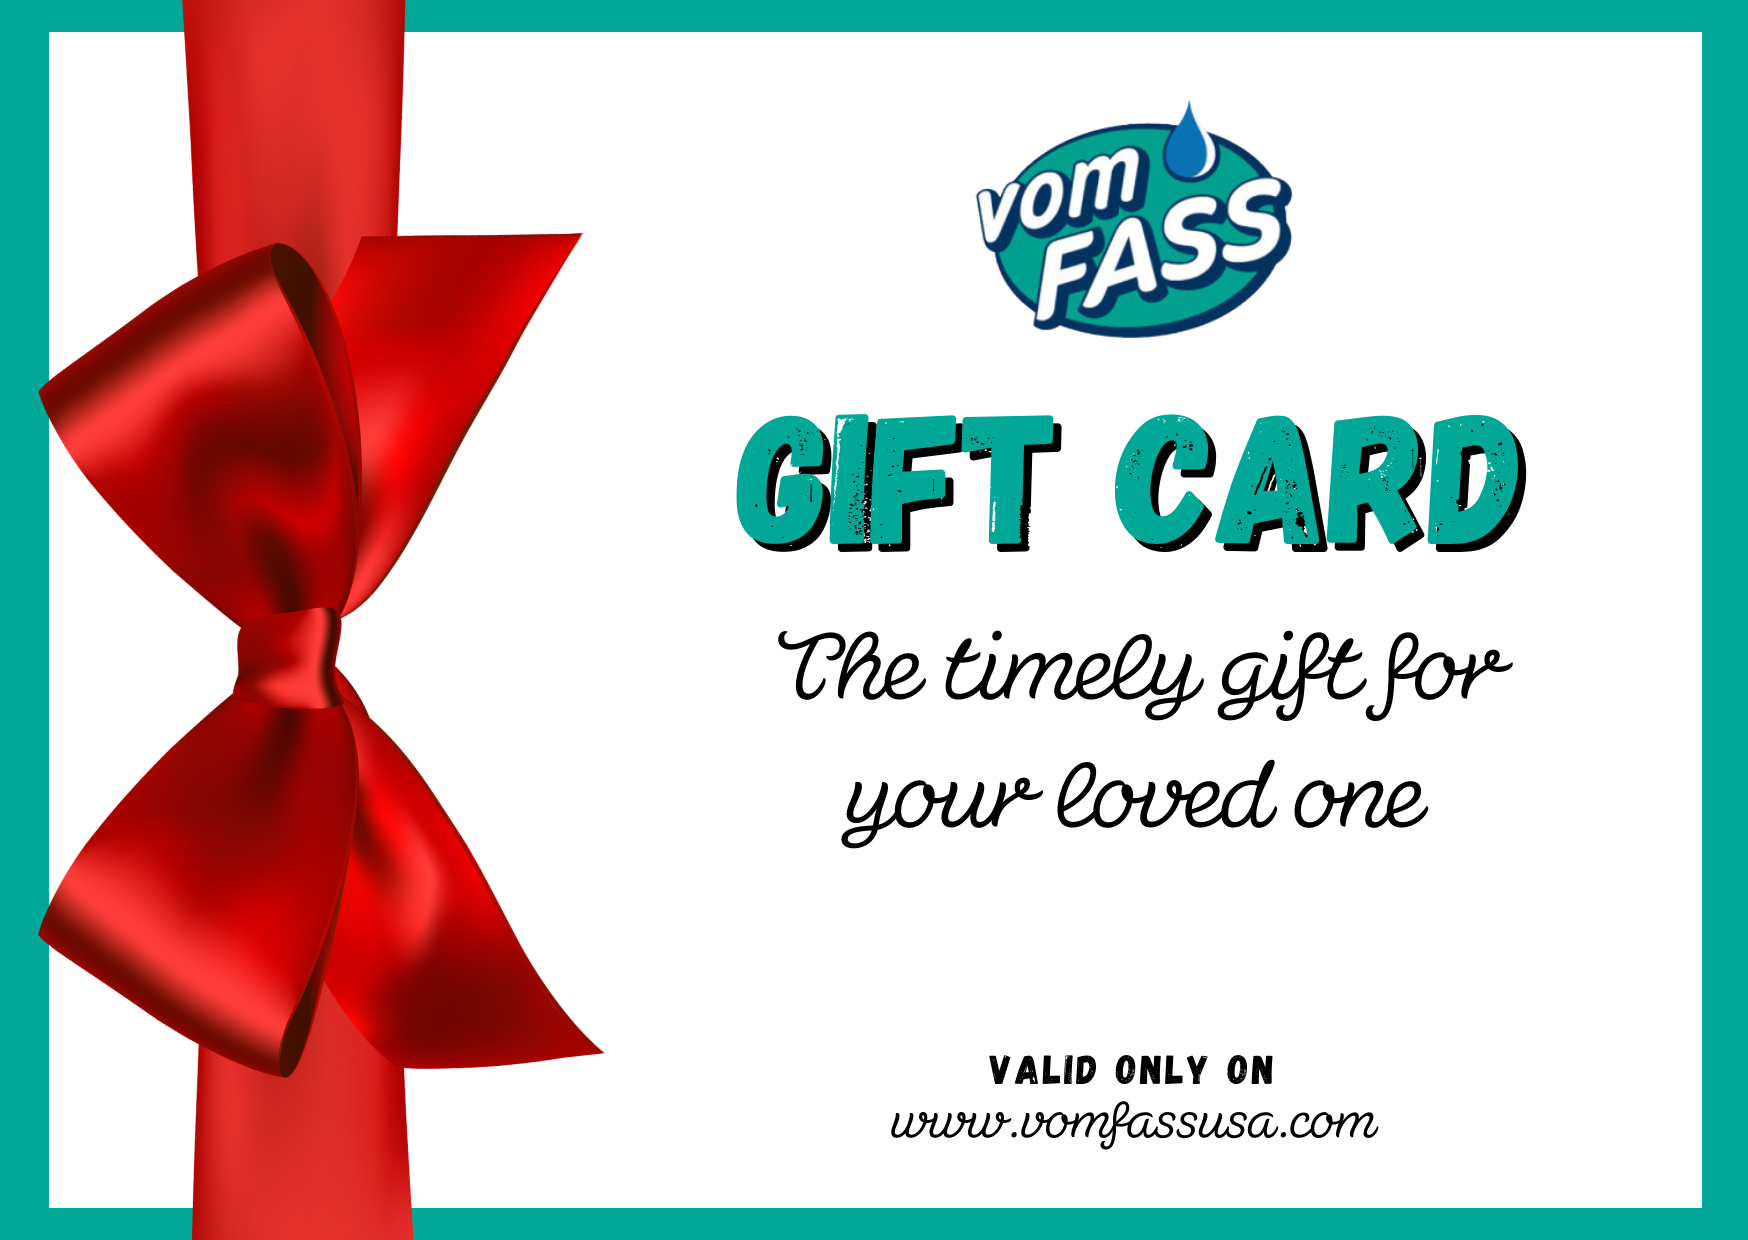 vomFASS eGift Card  Give the perfect gift for any occasion